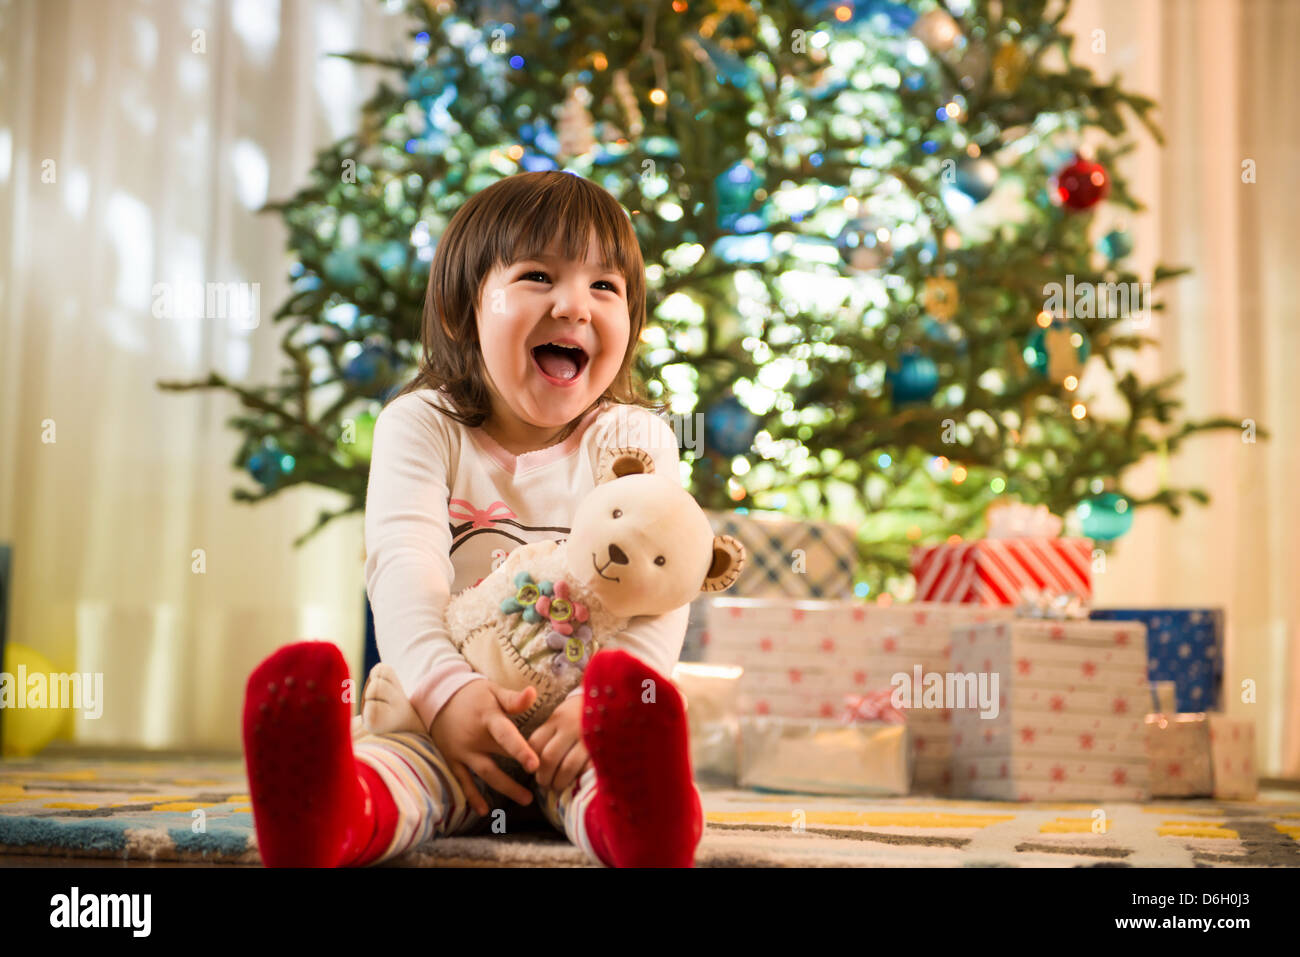 Girl laughing by Christmas tree Stock Photo - Alamy